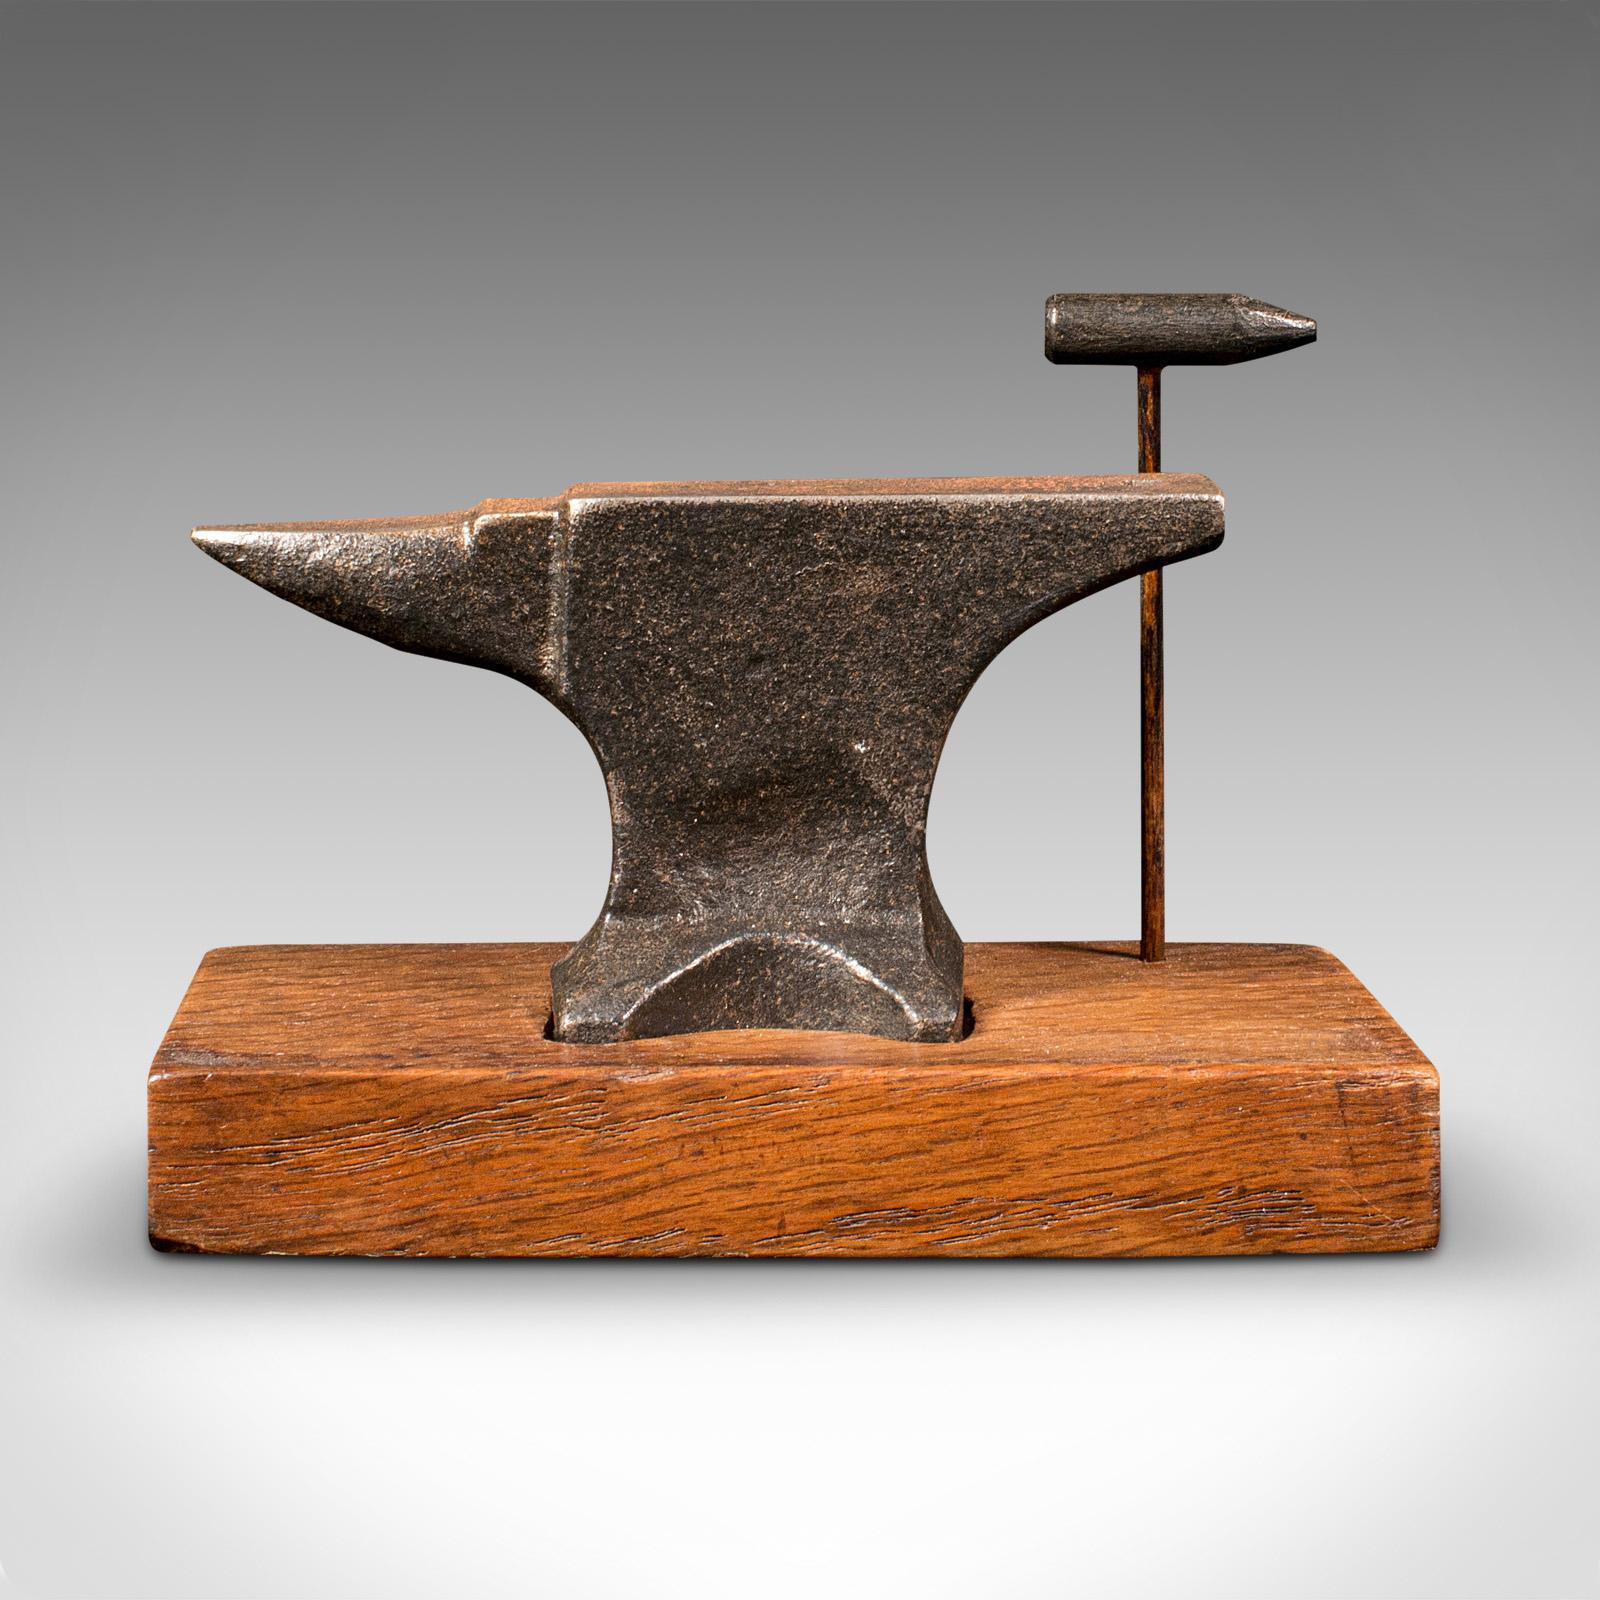 This is a small antique jeweller's anvil. An English, cast iron decorative tool set on an oak plinth, dating to the Edwardian period, circa 1910.

Delightfully petite, with appealing sings of use
Displays a desirable aged patina and in good